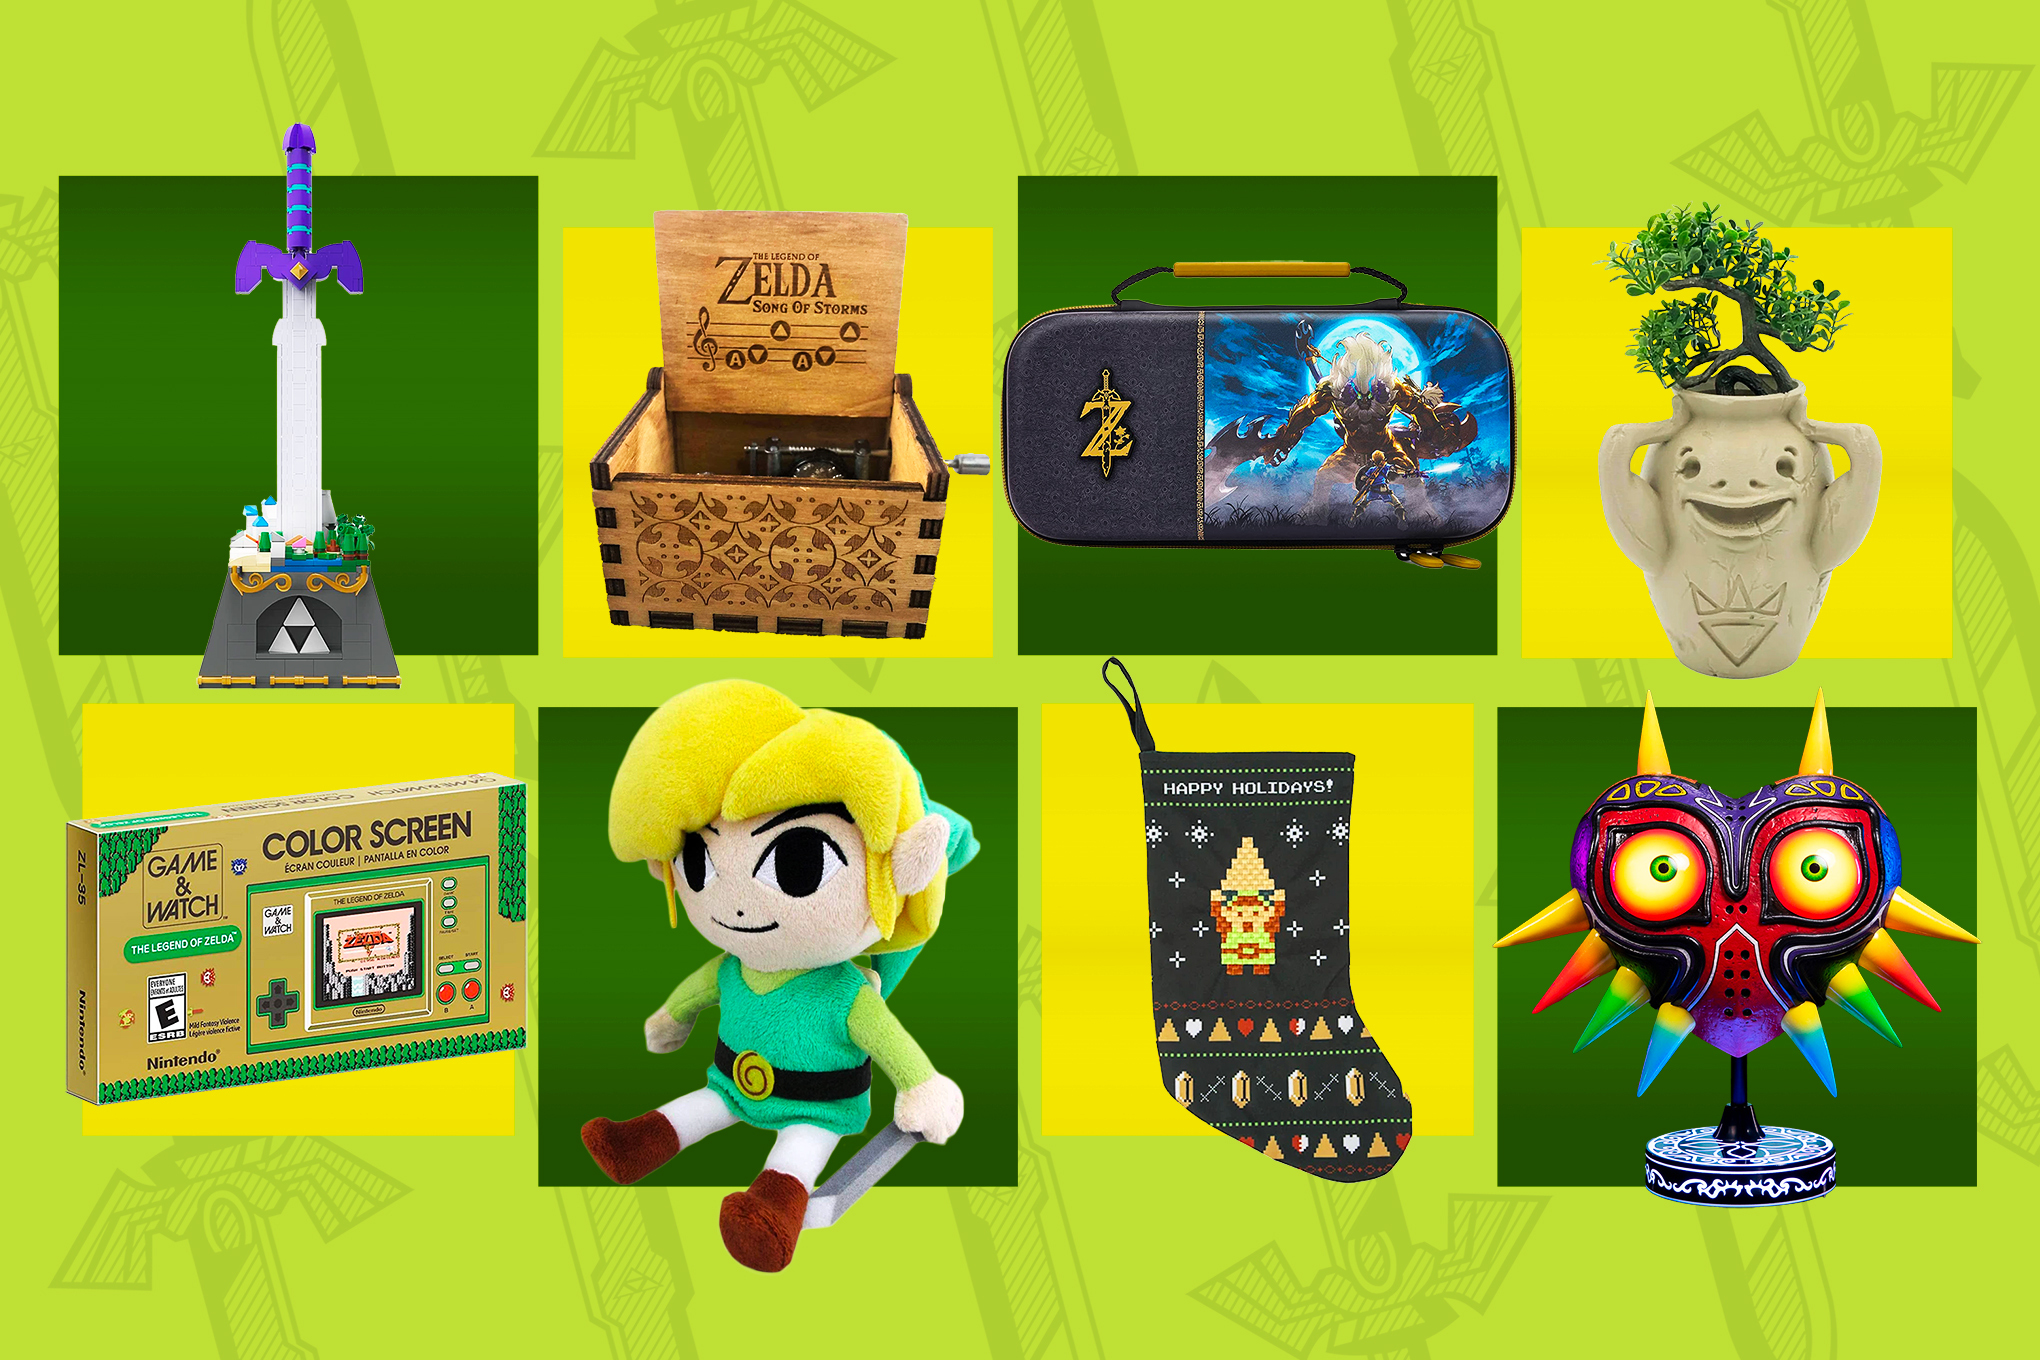 Nintendo’s Game &amp; Watch: The Legend of Zelda edition, Club Mocchi’s toon Link plushie from Wind Waker, First 4 Figures’ Majora’s Mask statue, PowerA’s Nintendo Switch case with a Lynel enemy on it, a 3D-printed Goron succulent planter from TheBearandWolfStudio on Etsy, a music box that plays Song of Storms by PhoenixAppeal on Etsy, and a Master Sword building kit from BuildingBoat Store.